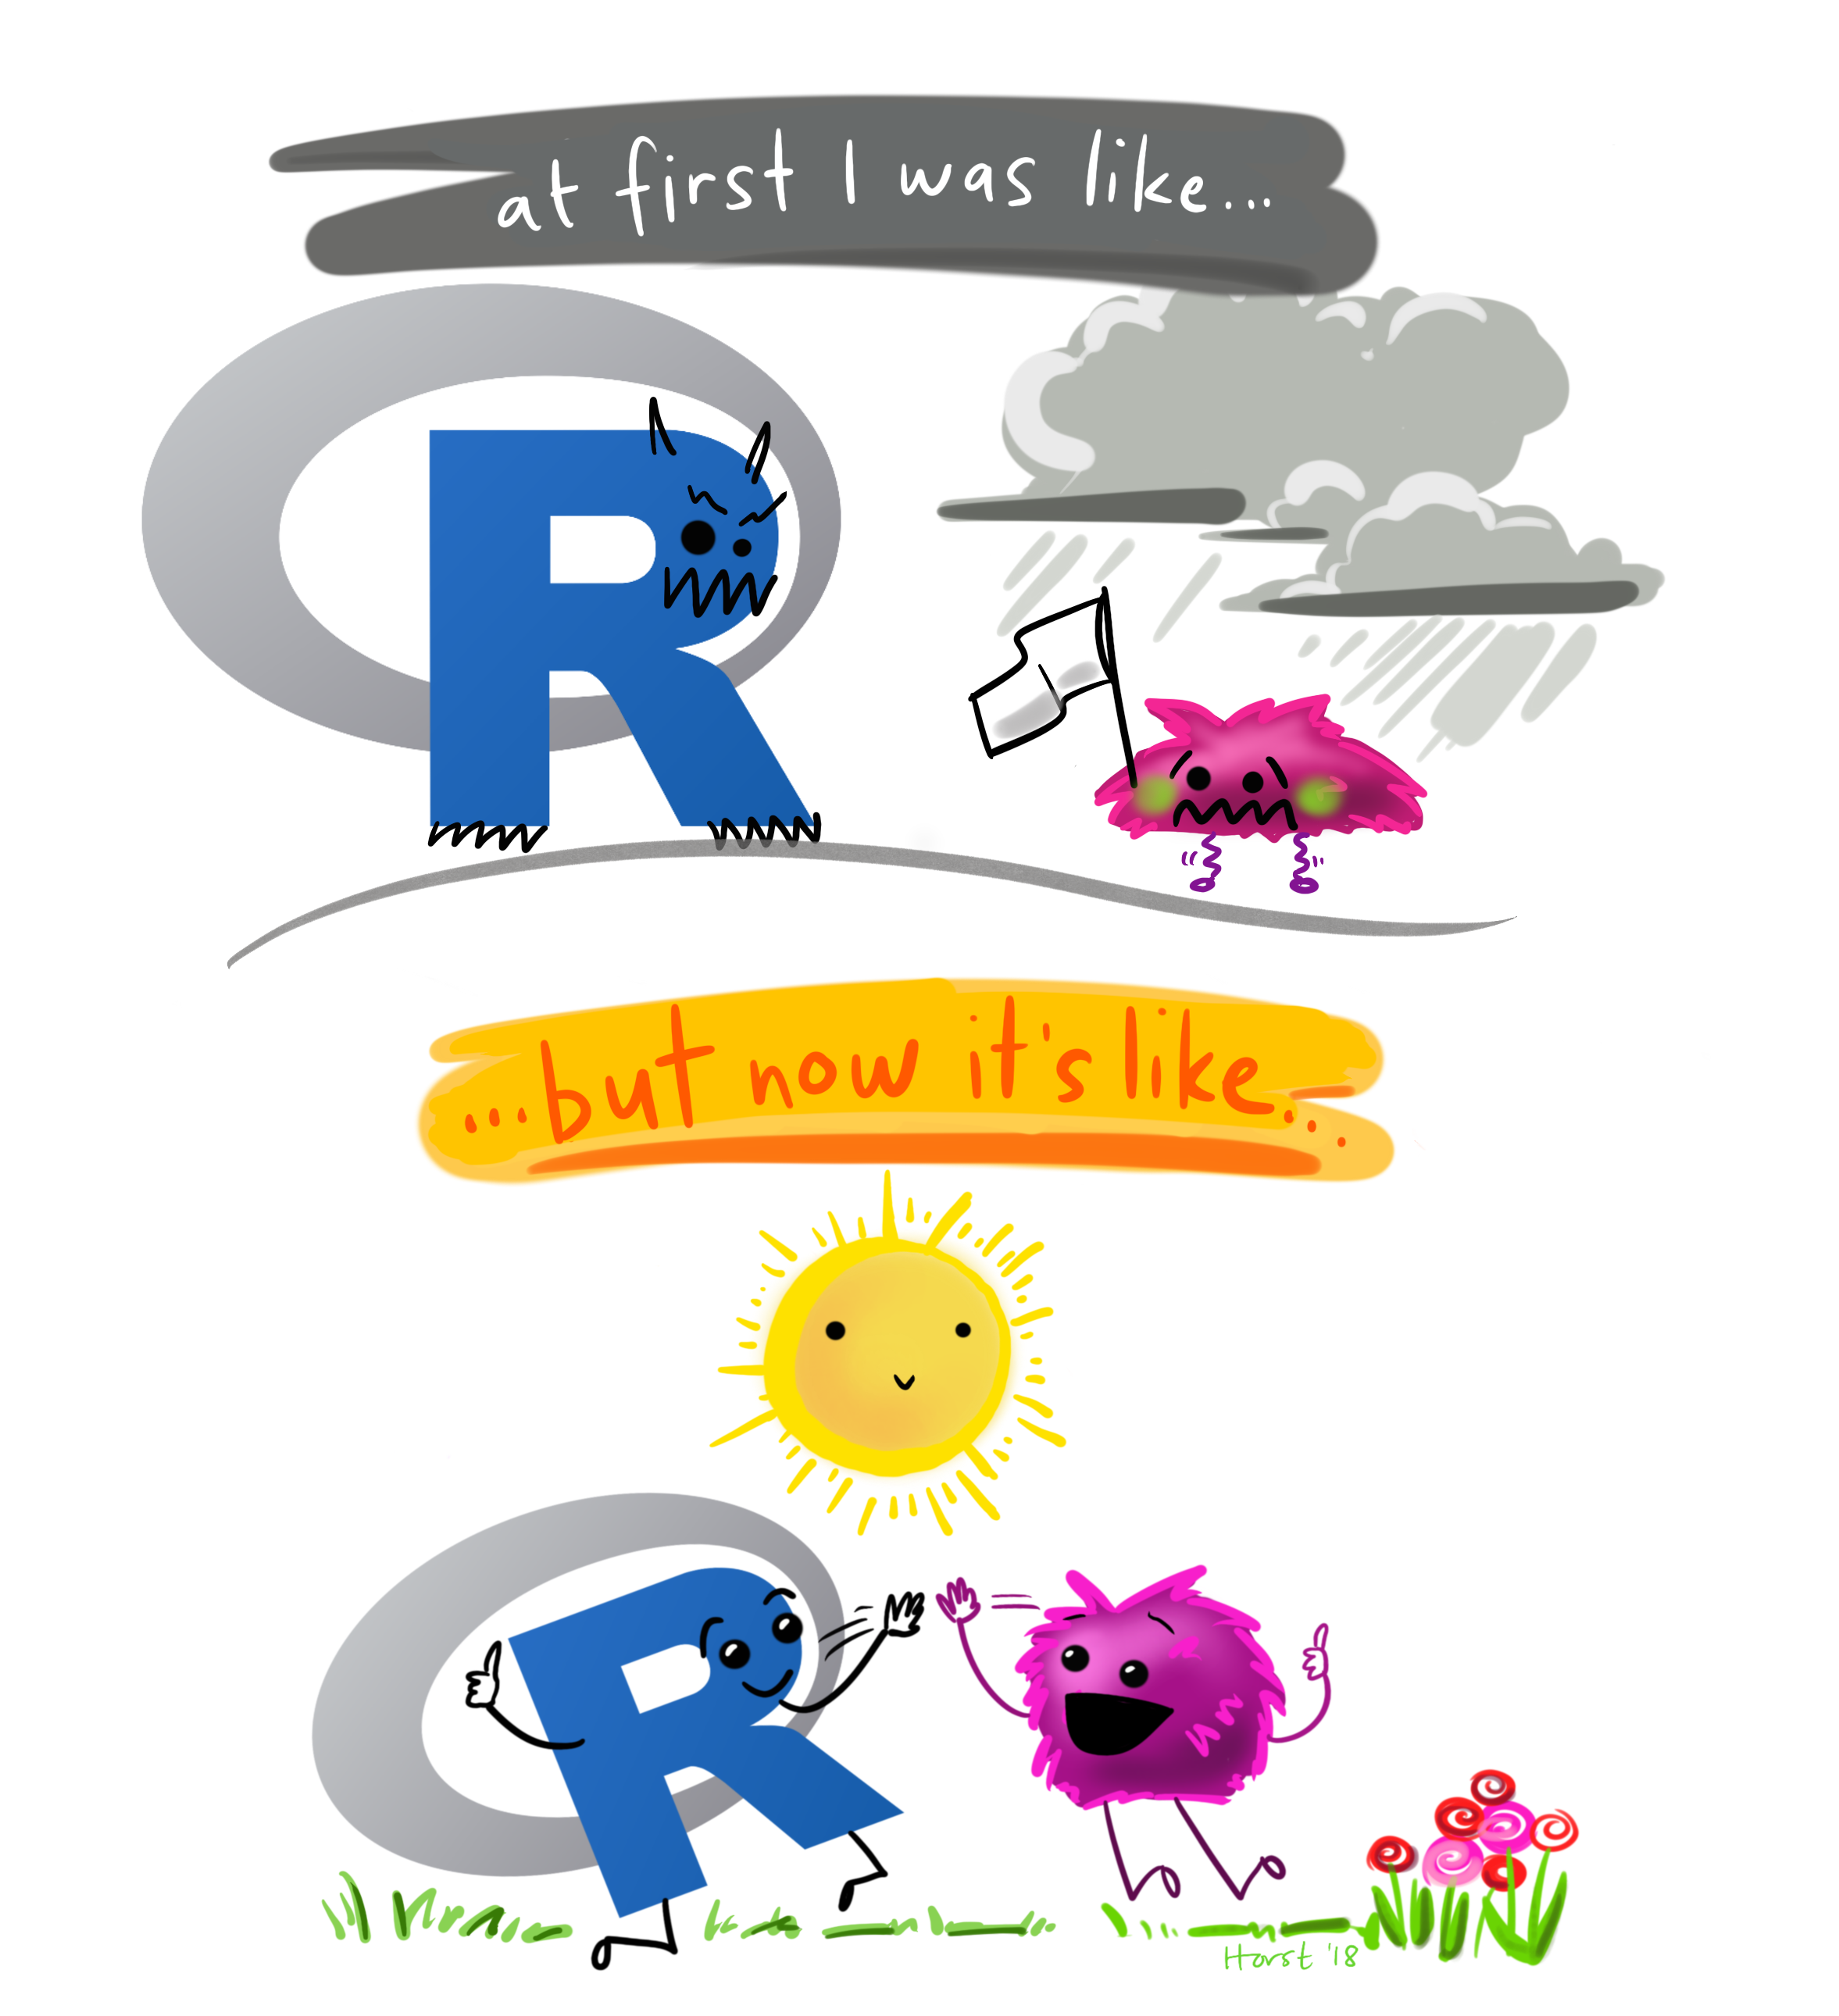 A digital cartoon with two illustrations: the top shows the R-logo with a scary face, and a small scared little fuzzy monster holding up a white flag in surrender while under a dark storm cloud. The text above says 'at first I was like…' The lower cartoon is a friendly, smiling R-logo jumping up to give a happy fuzzy monster a high-five under a smiling sun and next to colorful flowers. The text above the bottom illustration reads 'but now it’s like…'